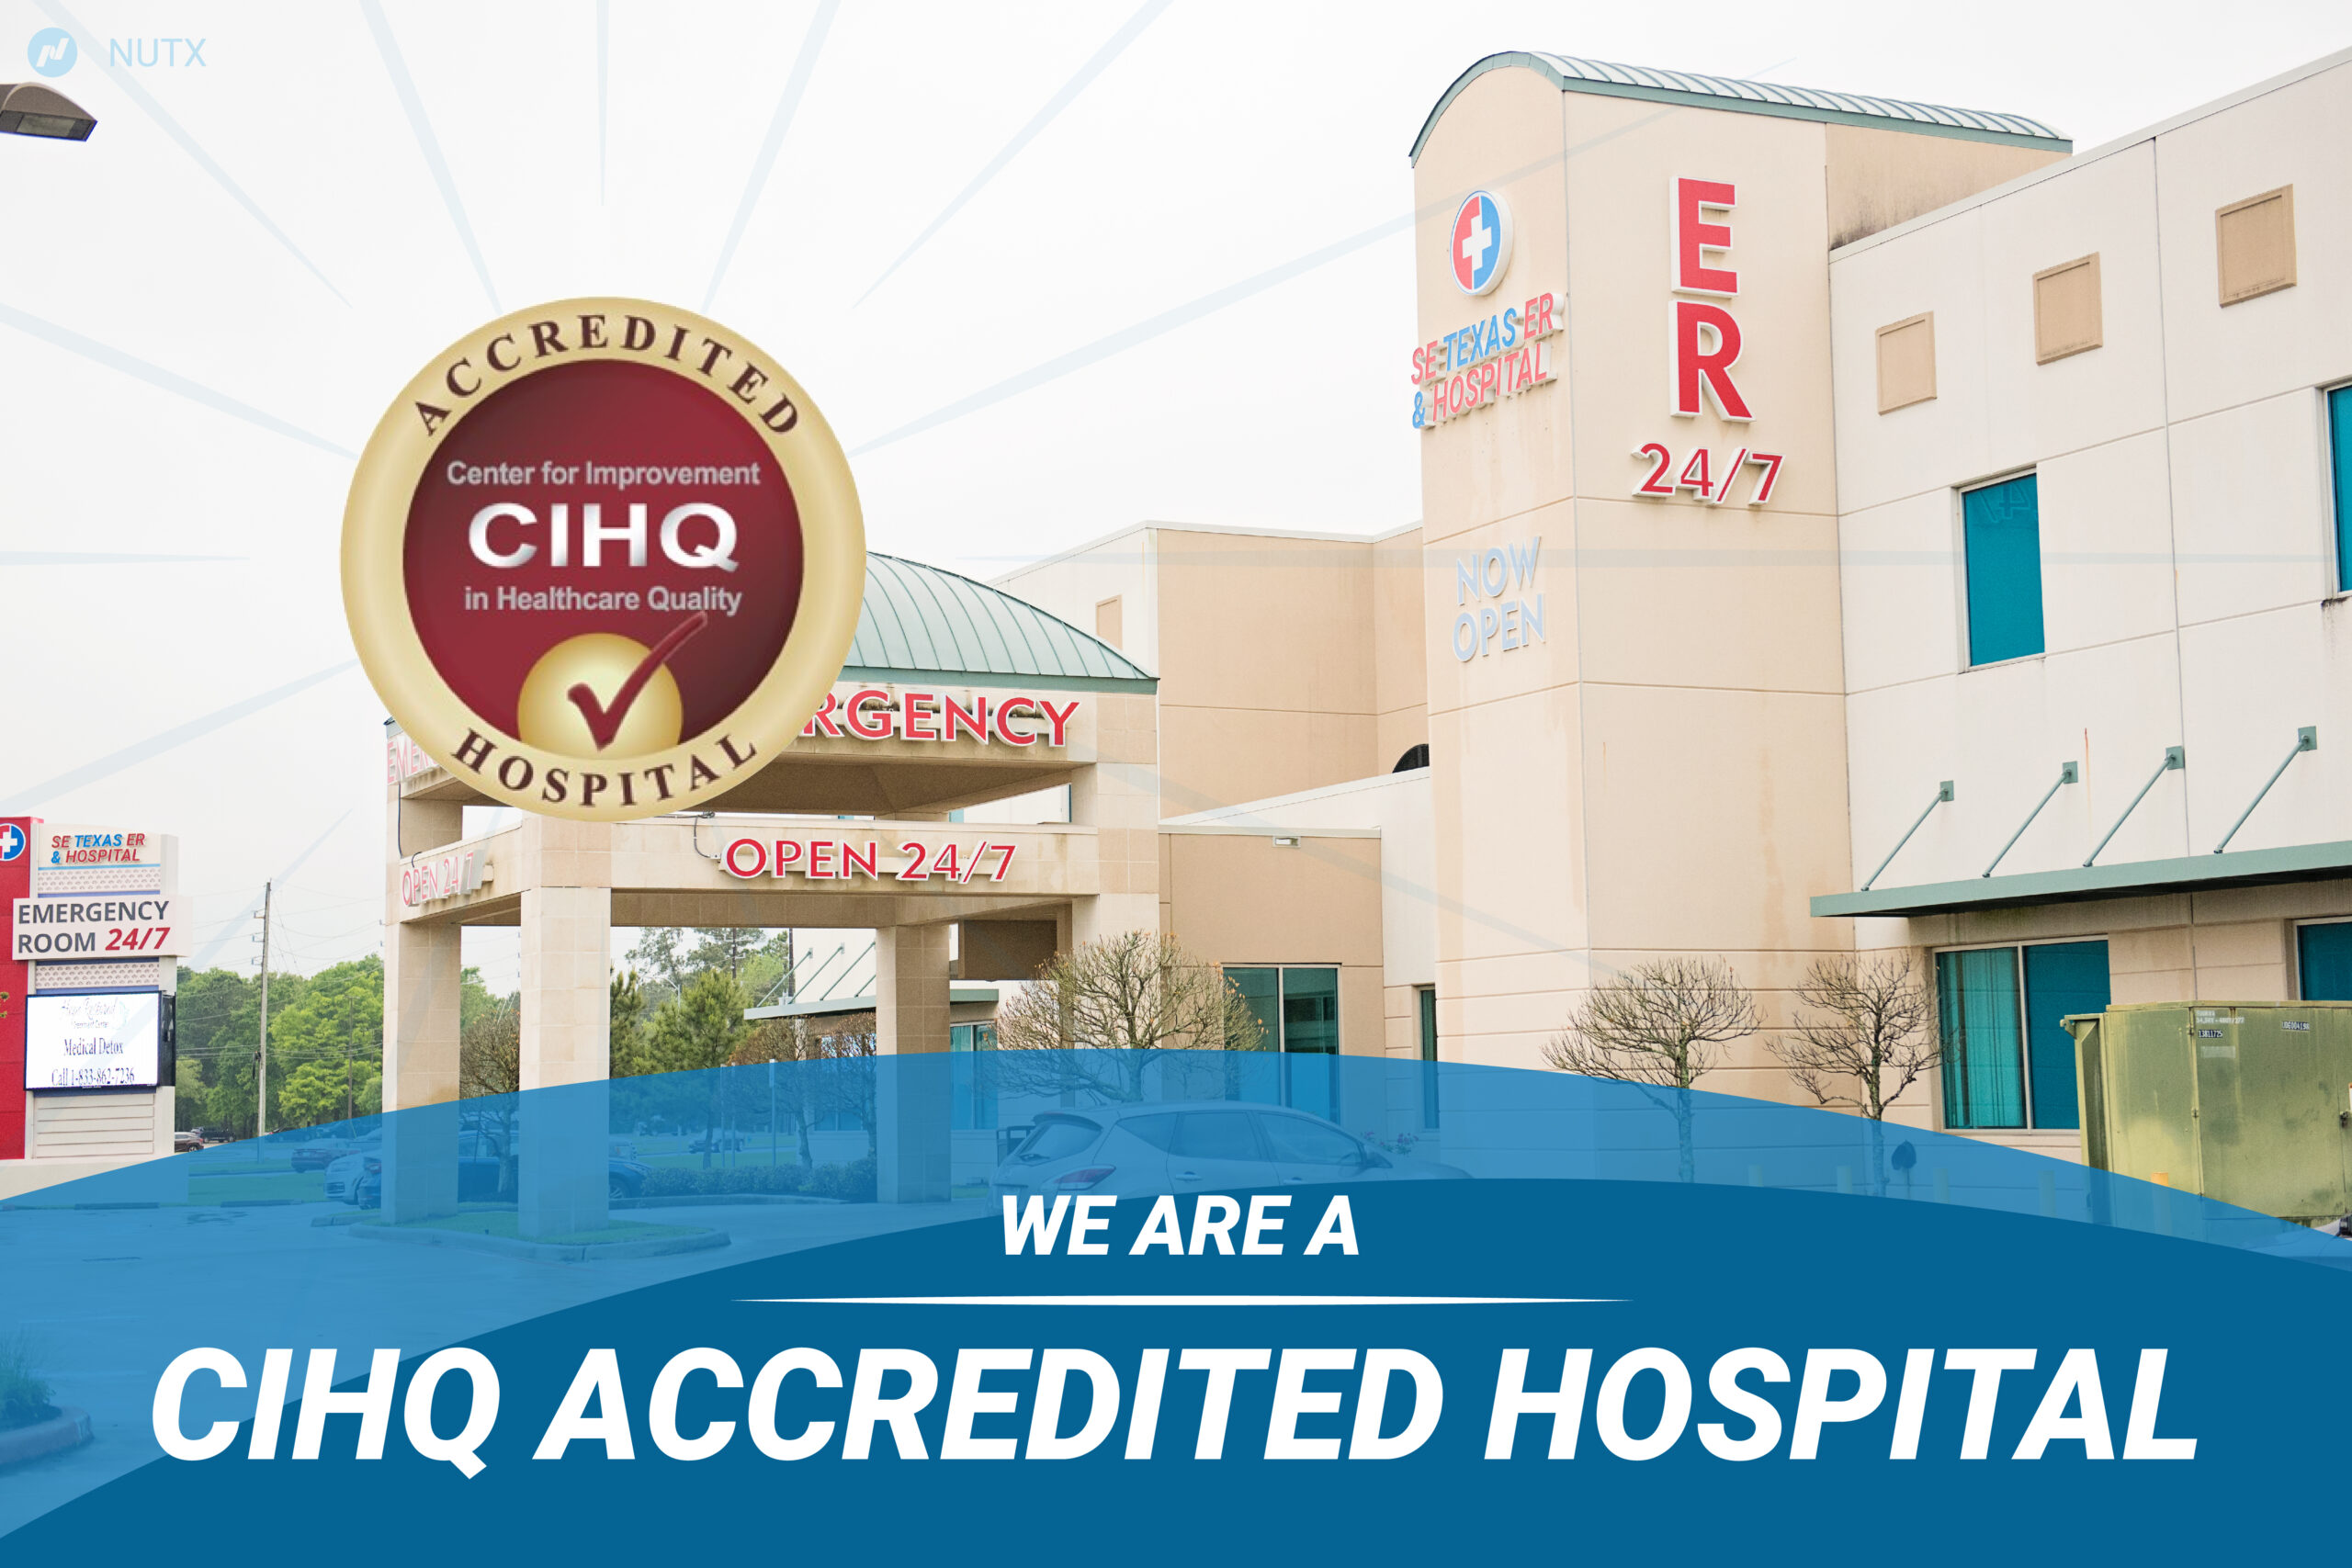 All Three SE Texas ER & Hospital Locations Obtained Hospital Accreditation from the Center for Improvement in Healthcare Quality (CIHQ)